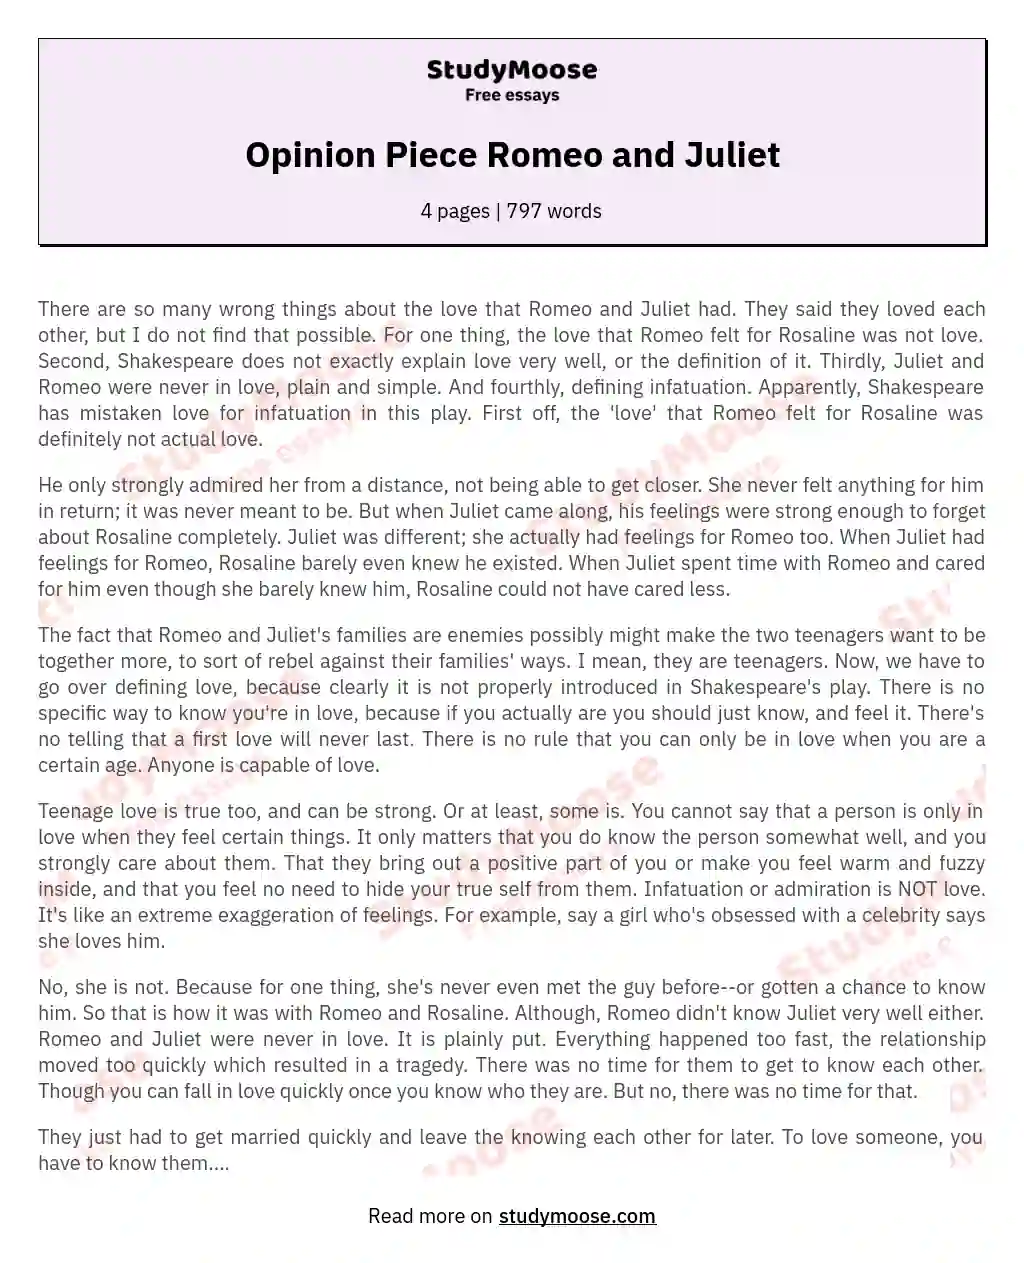 Opinion Piece Romeo and Juliet